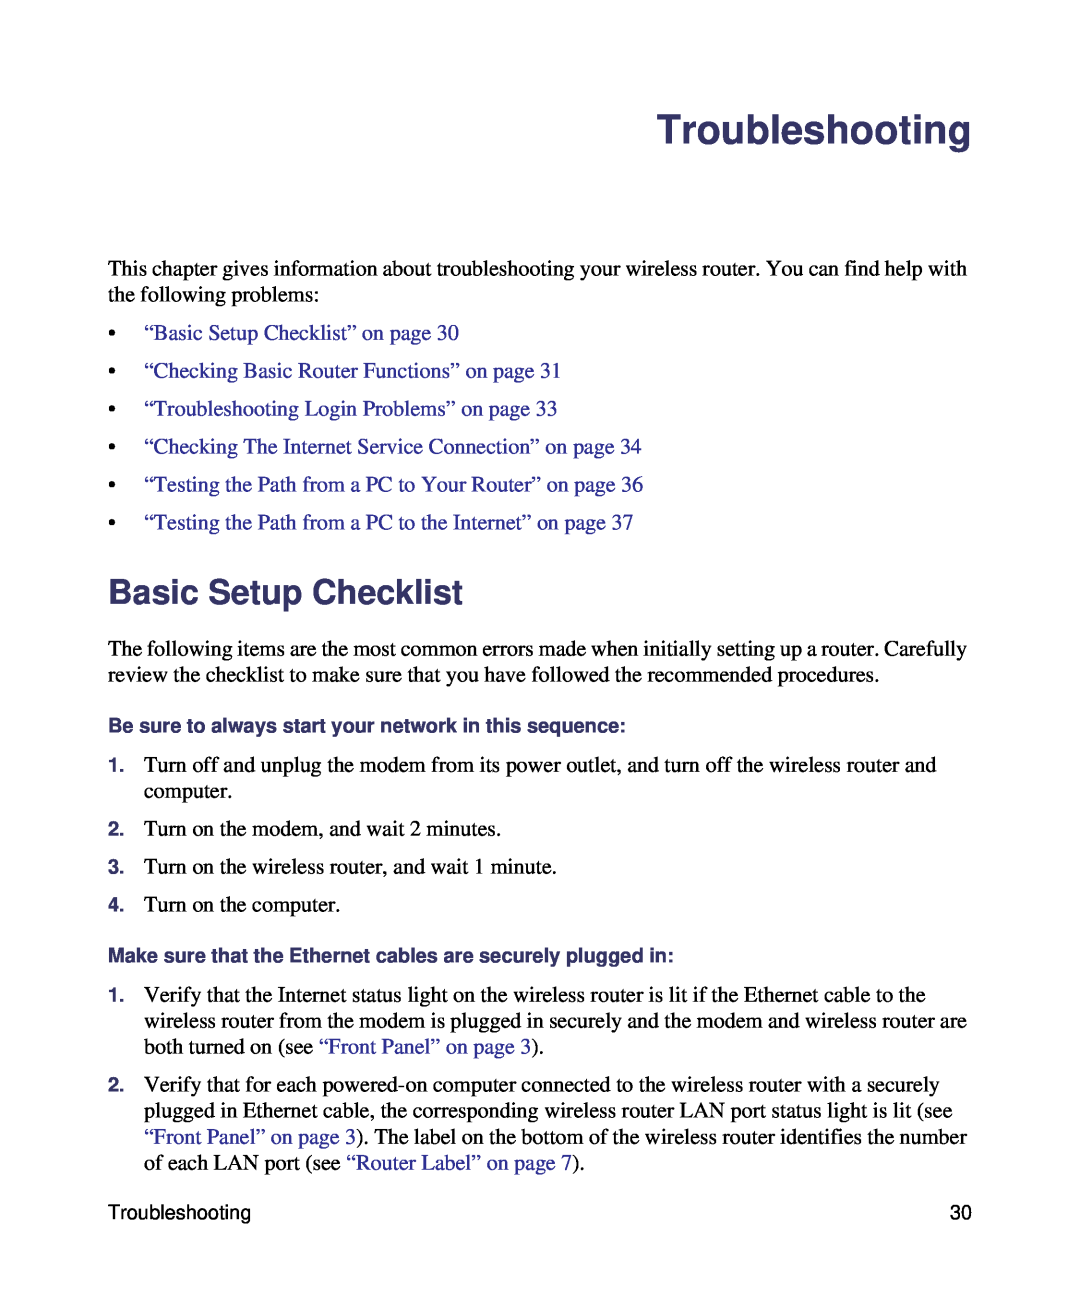 NETGEAR WNDR3400-100NAS Troubleshooting, “Basic Setup Checklist” on page, “Checking Basic Router Functions” on page 